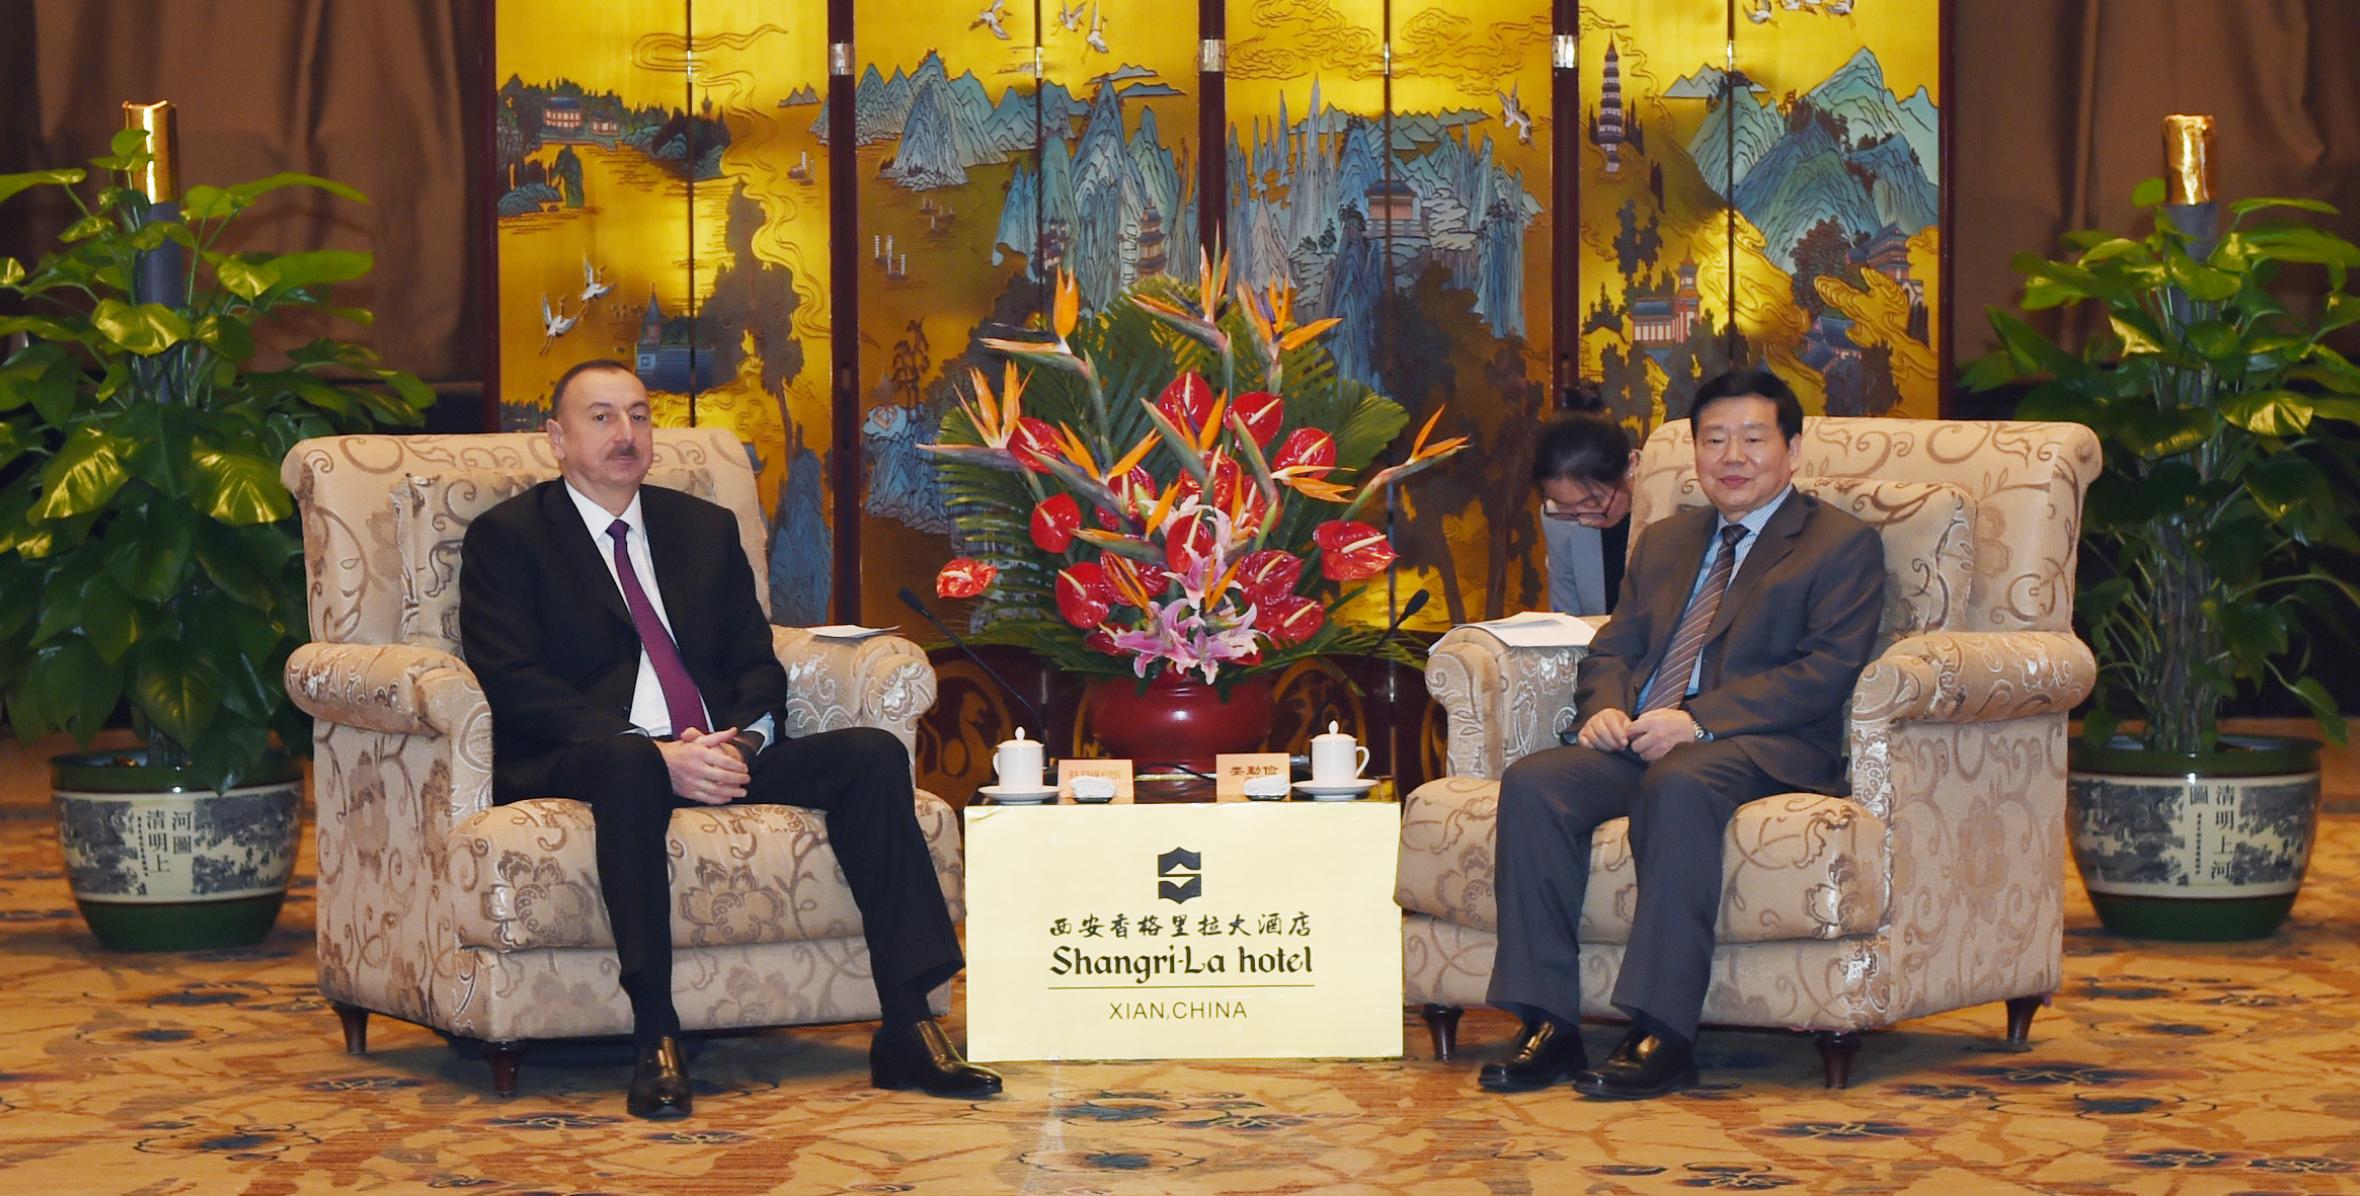 Ilham Aliyev met with Governor of Shaanxi Province Lou Qinjian